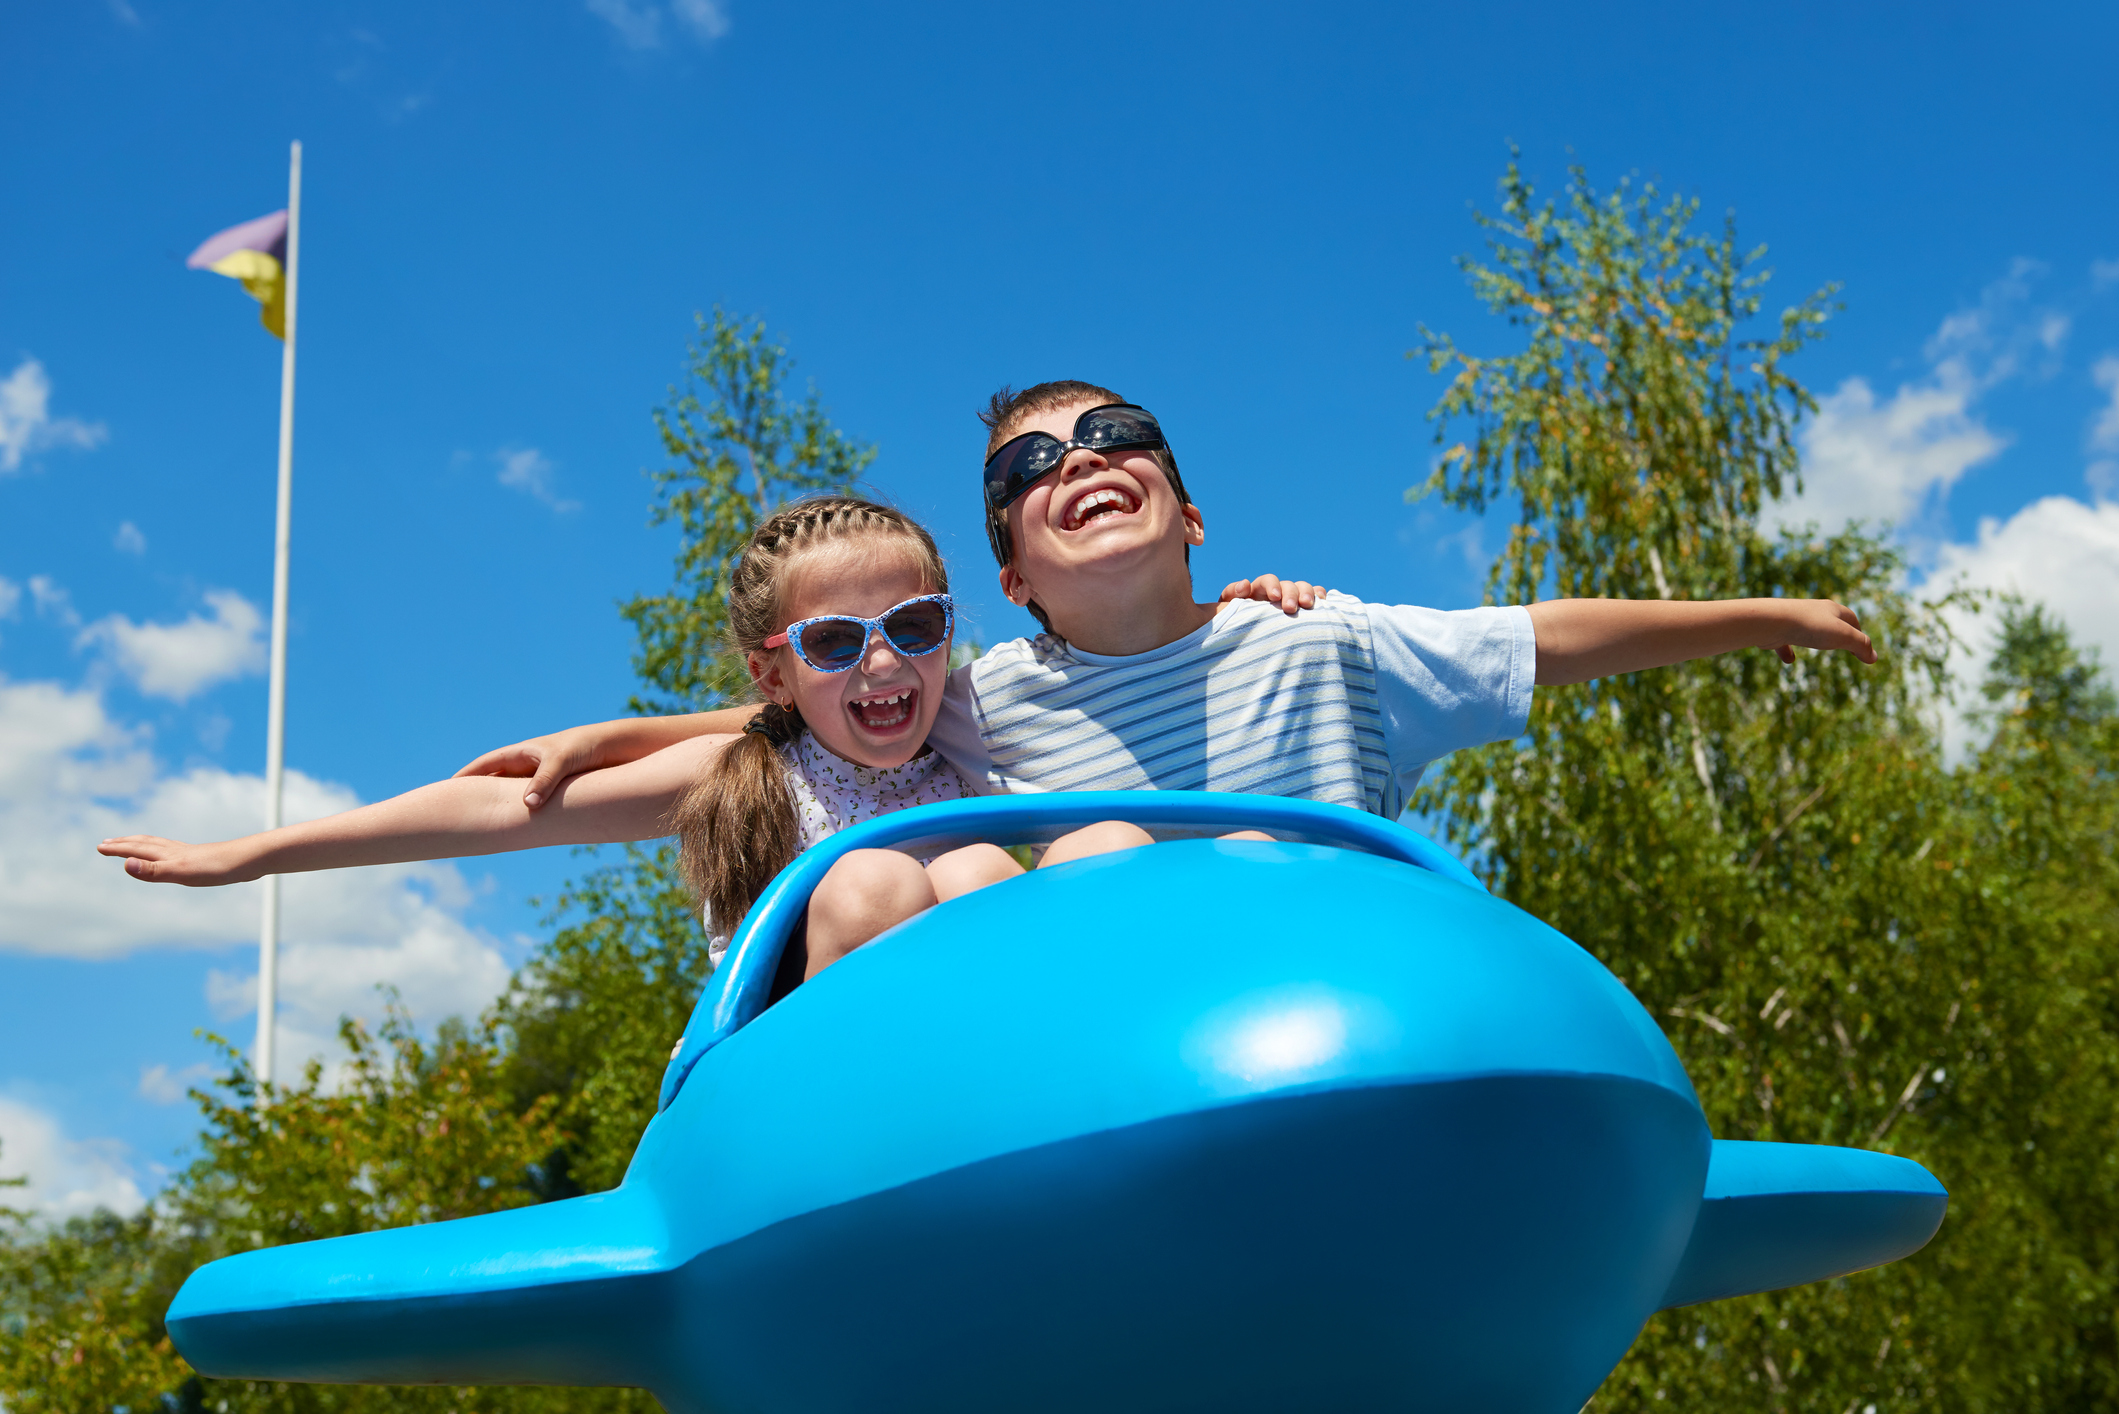 child girl and boy fly on blue plane attraction in city park, happy childhood, summer vacation concept